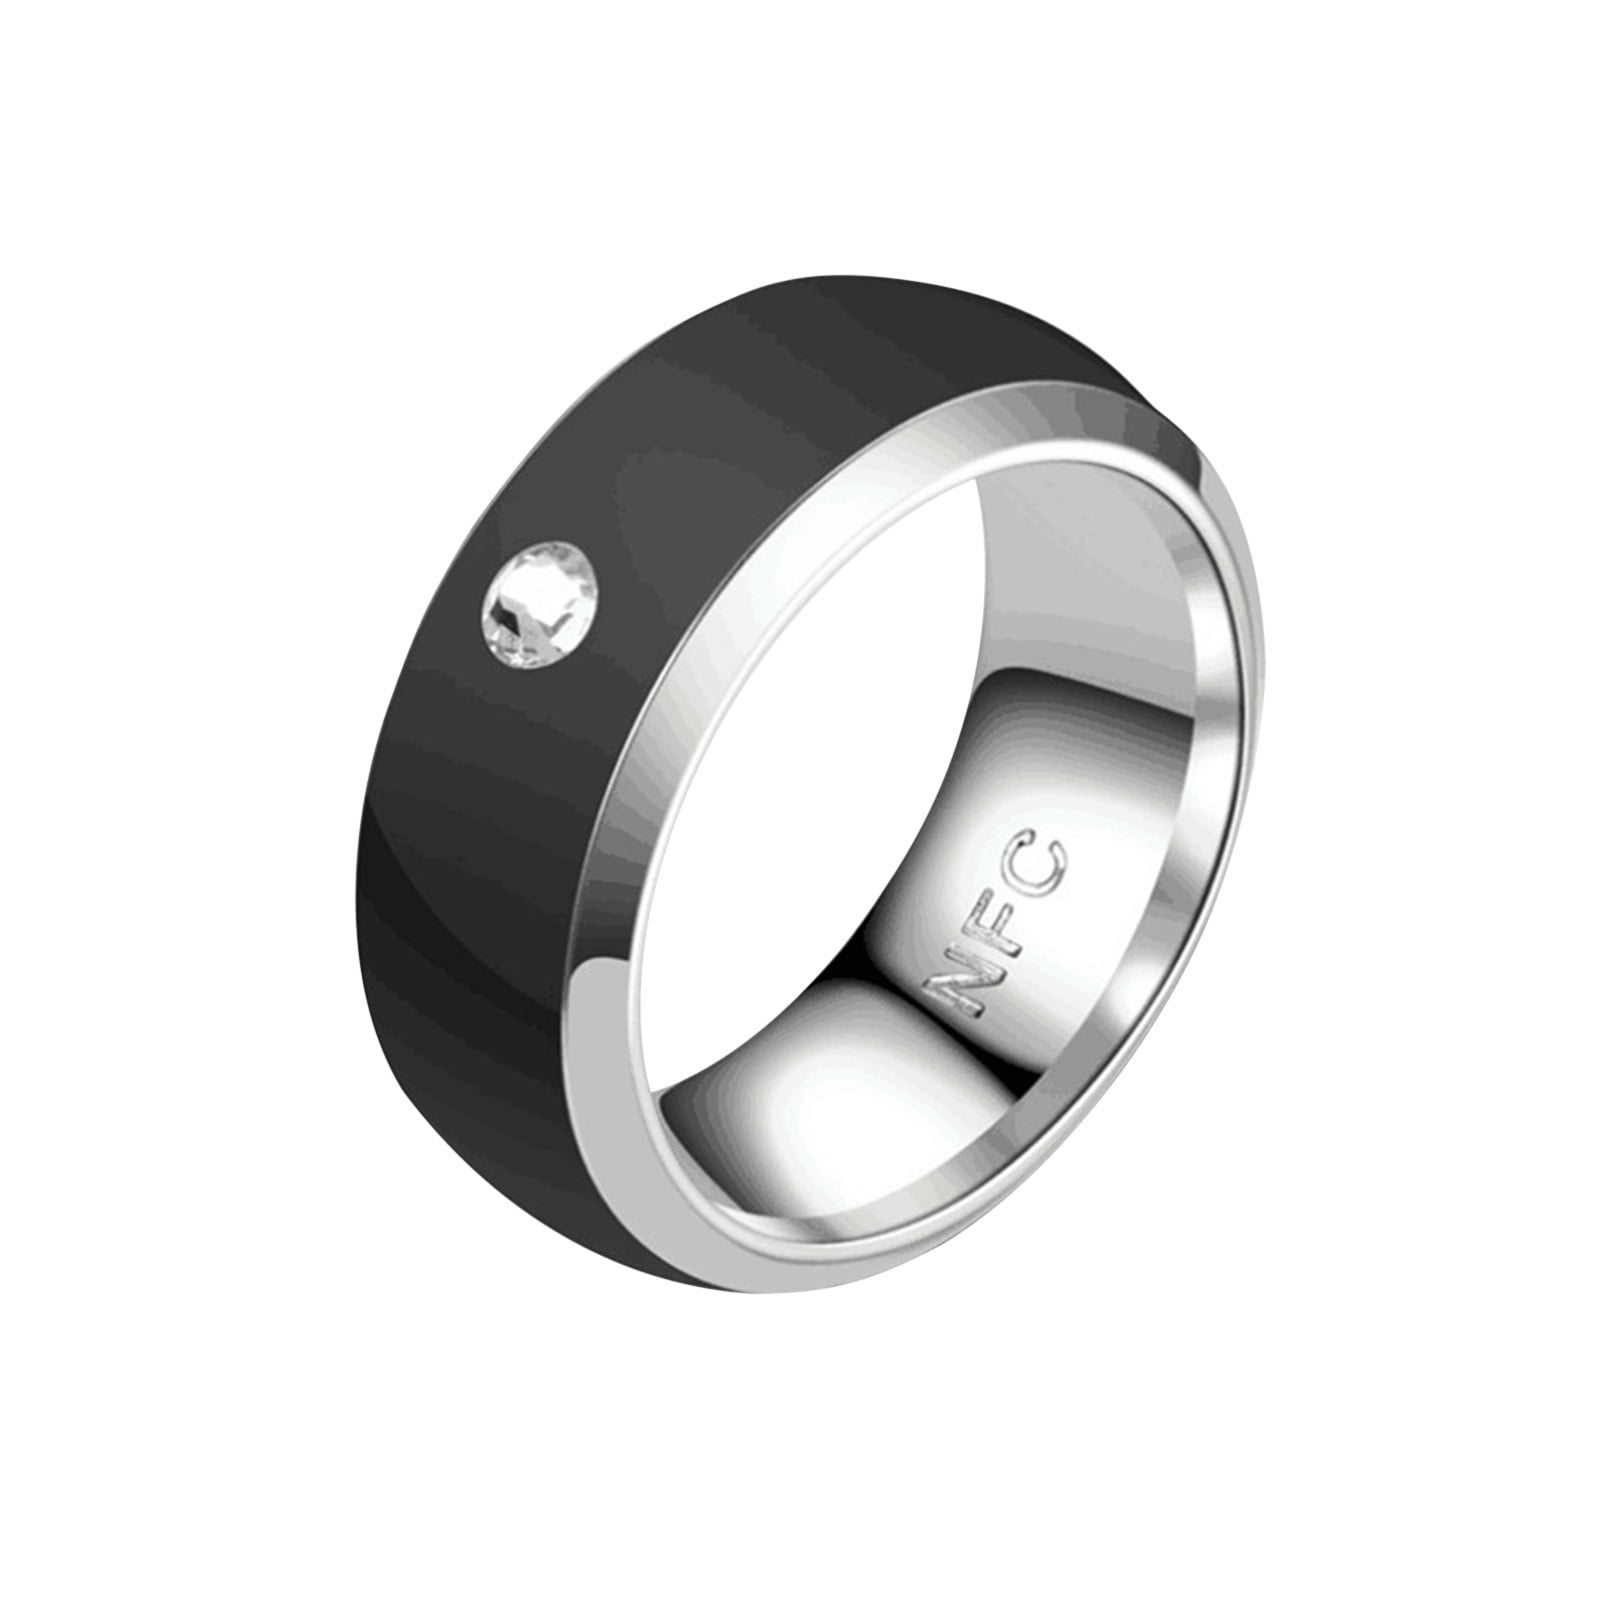 8, Black NFC Smart Chip Mobile Phone Smart Ring Stainless Steel Ring Realizes Screen Tomb Application Locks Wireless Radio Frequency Communication Water Resistance Jewelry 